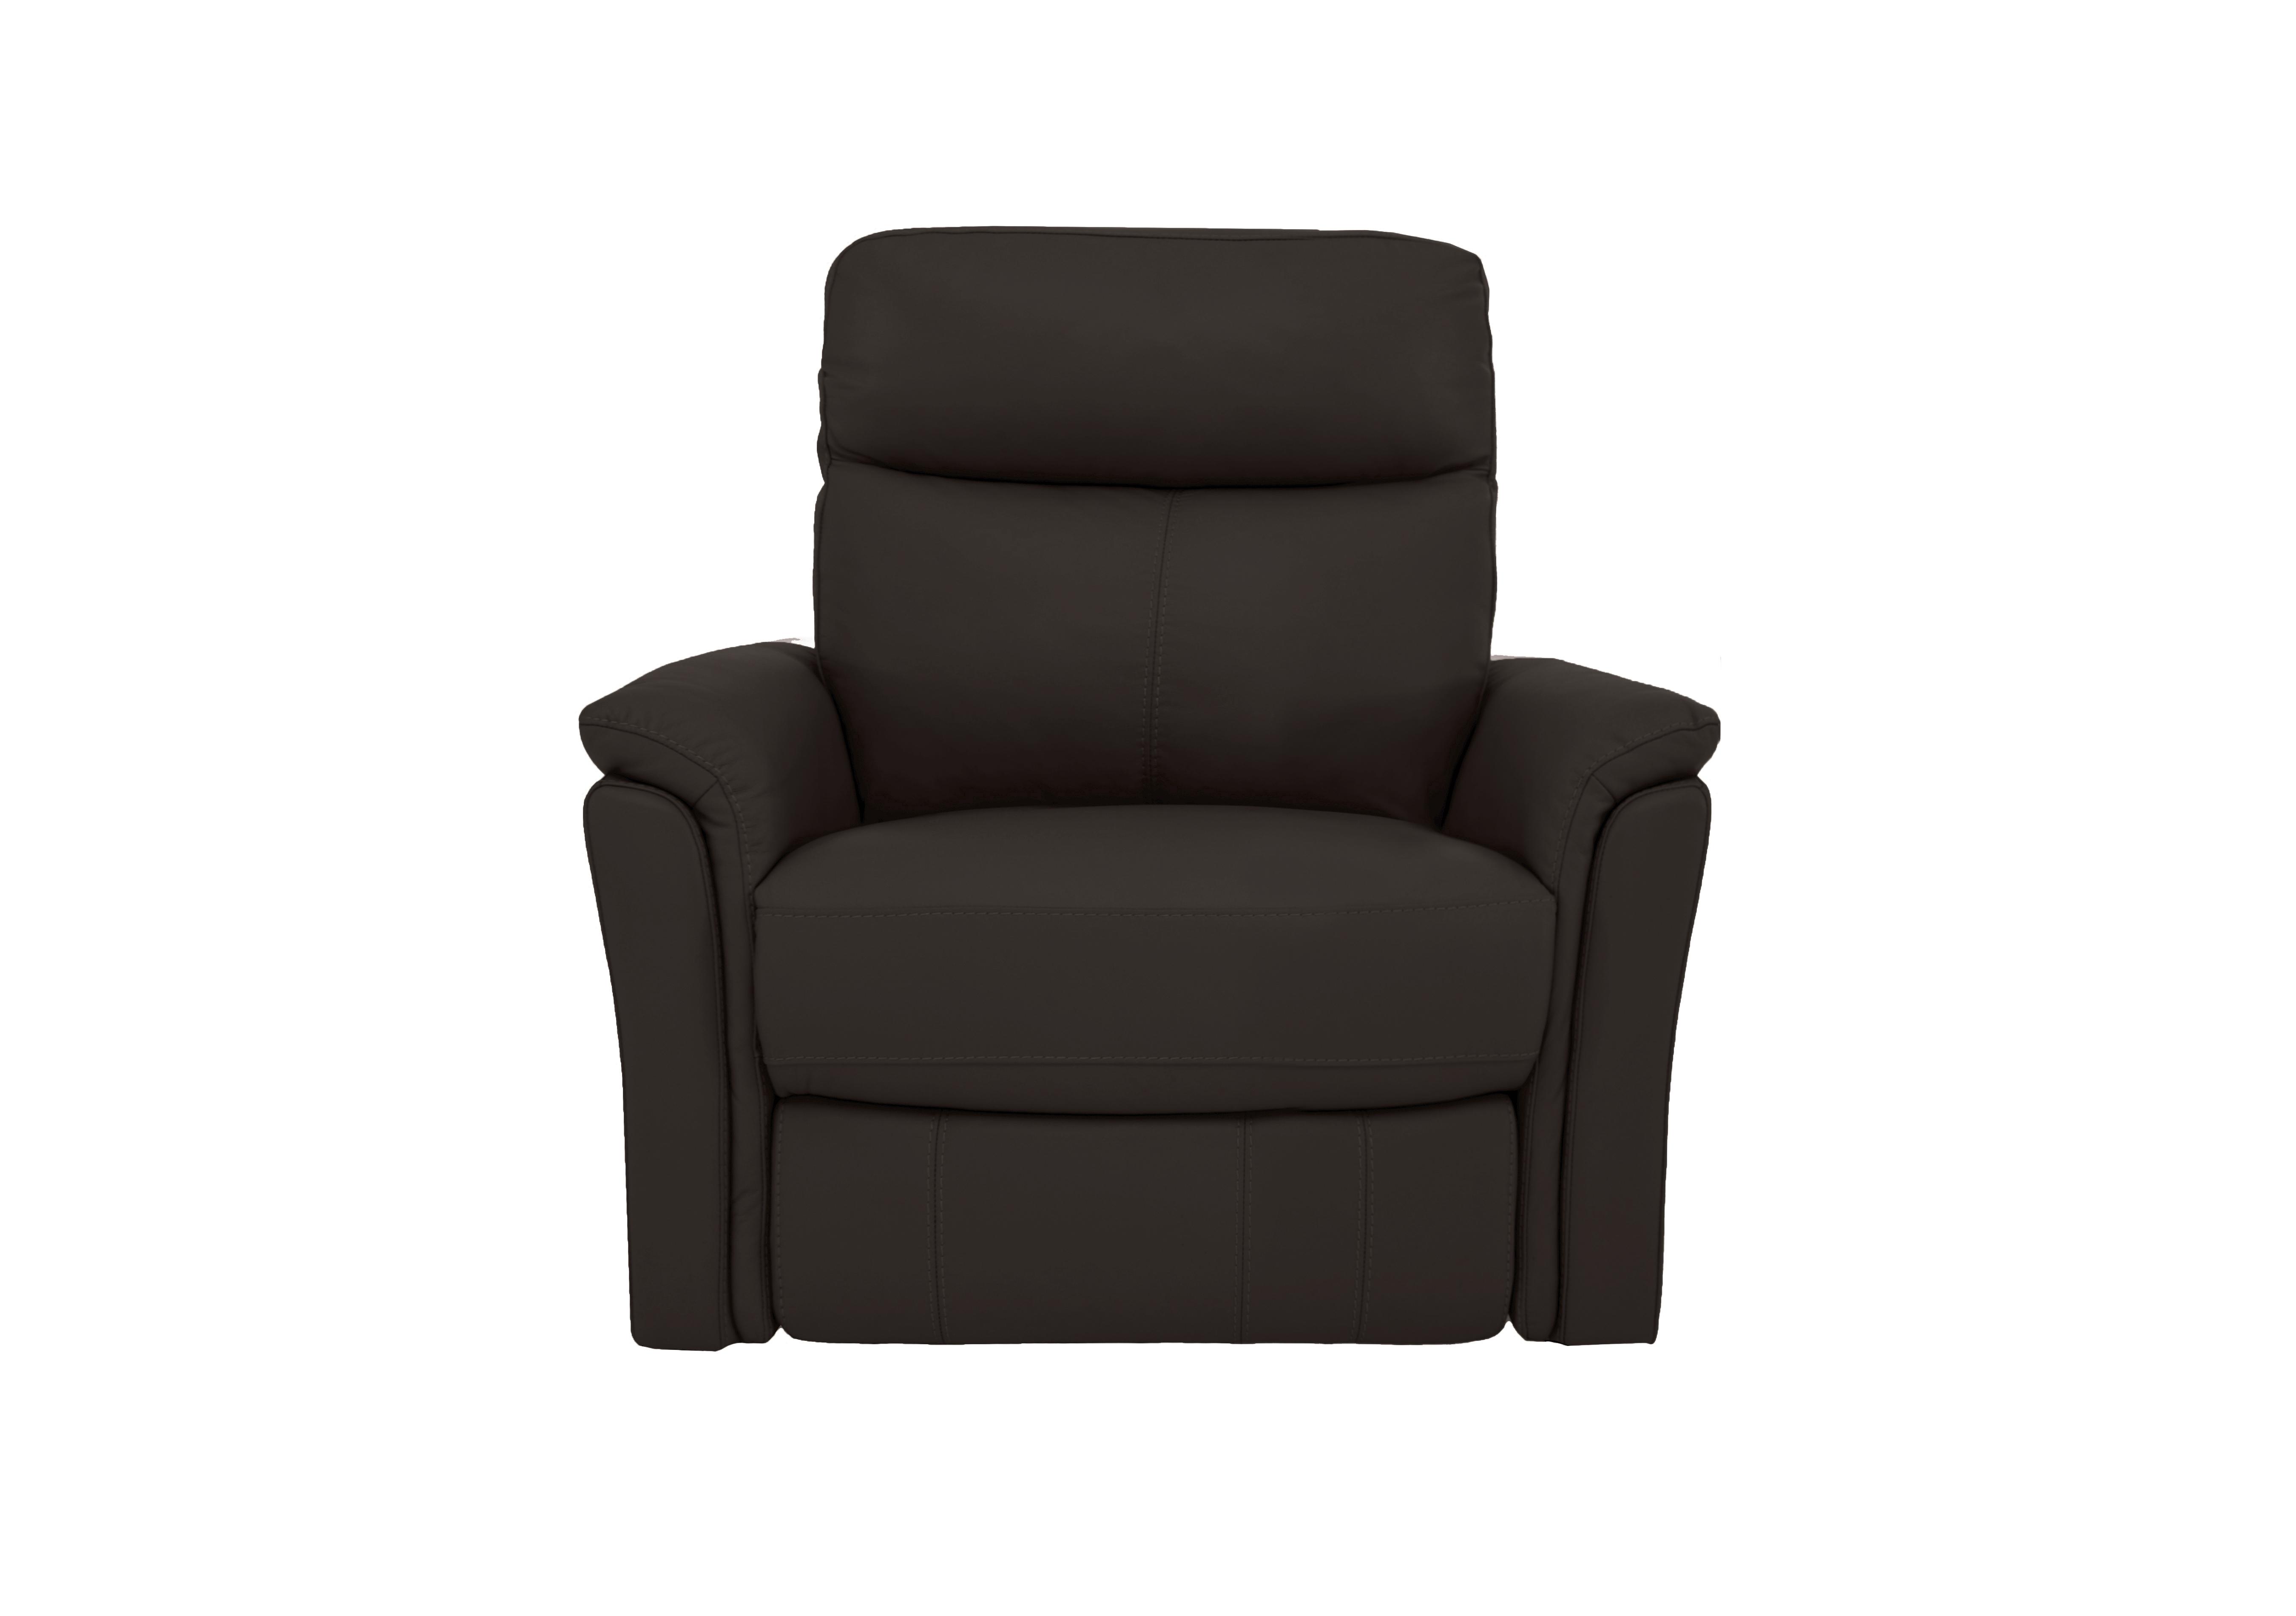 Compact Collection Piccolo Recliner Armchair in Bv-1748 Dark Chocolate on Furniture Village